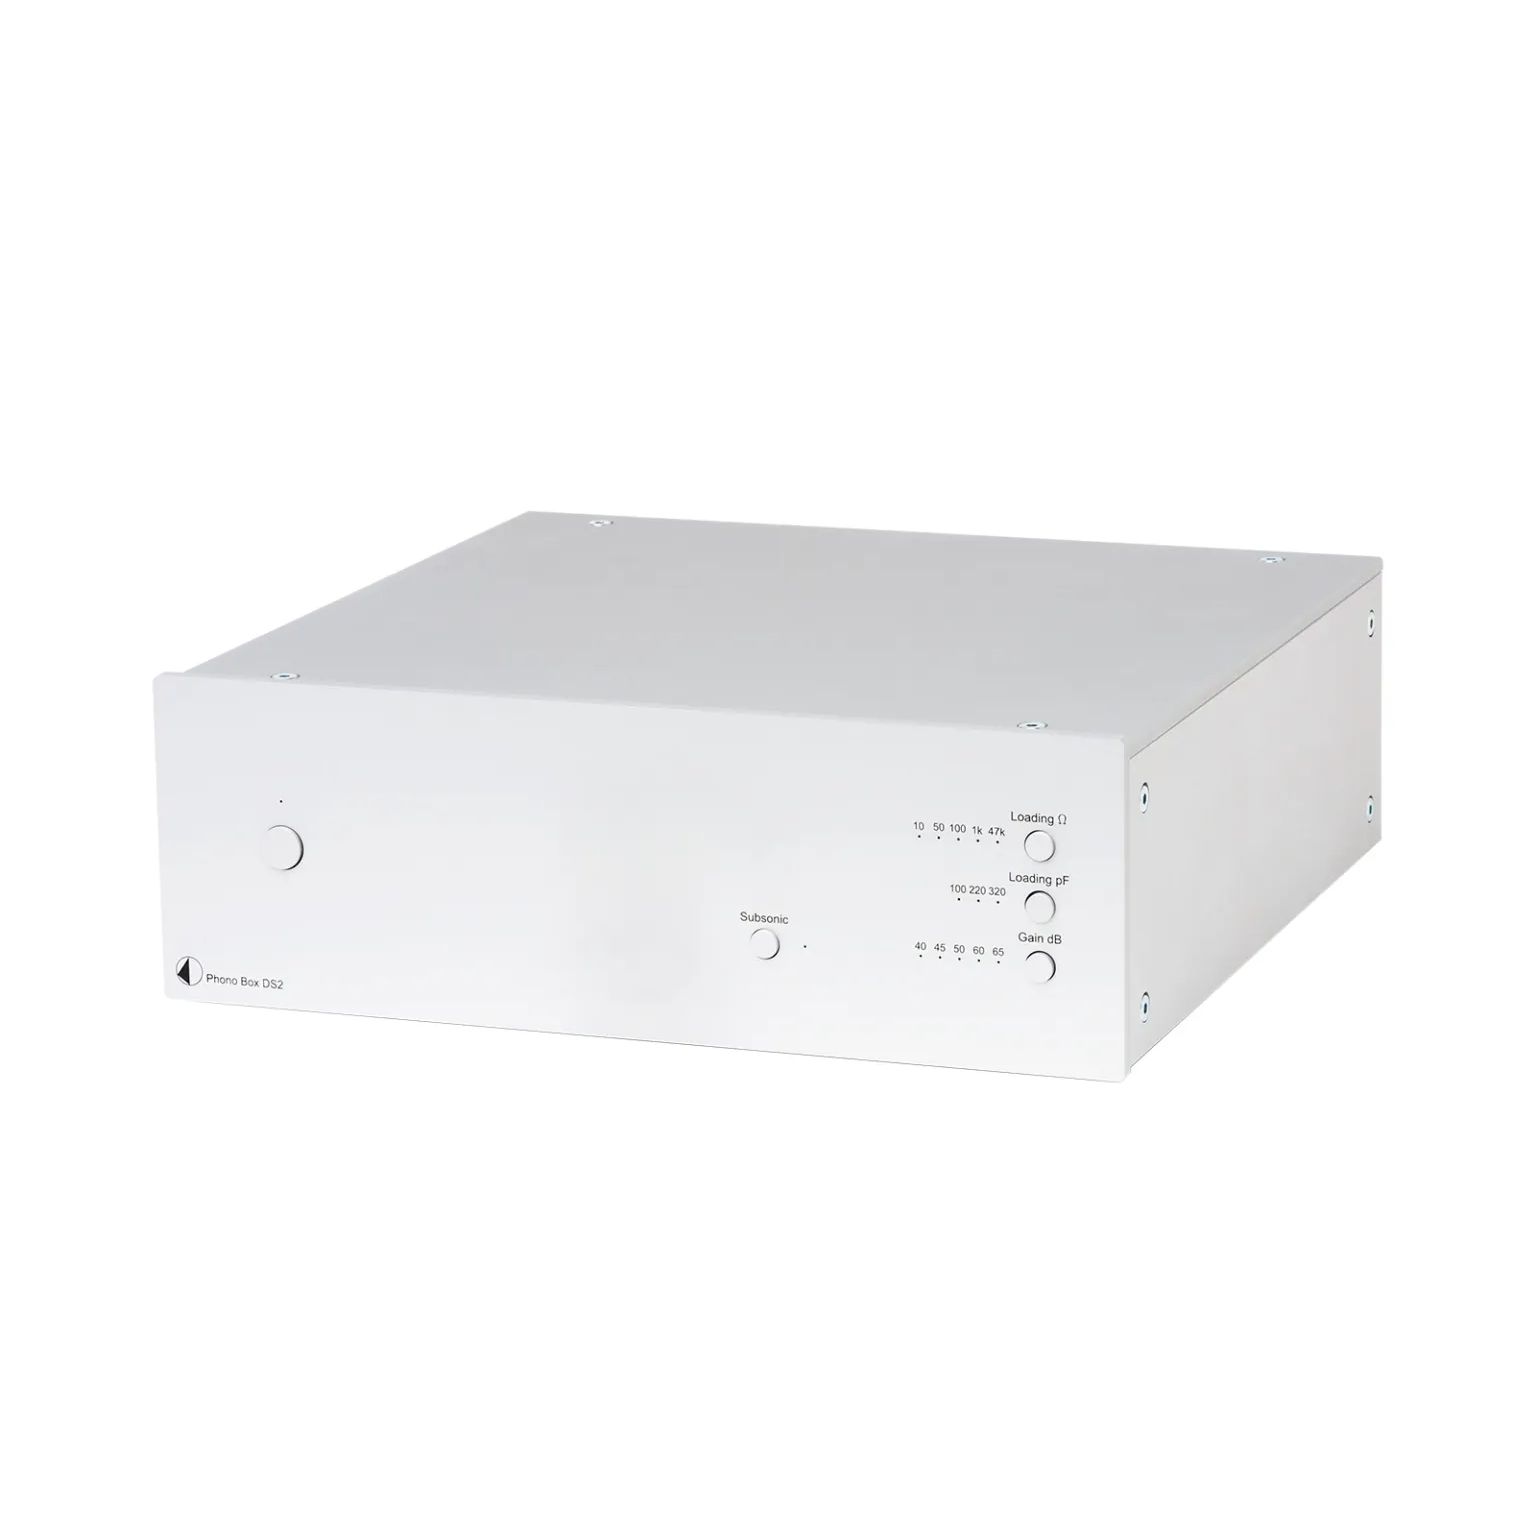 Pro-Ject Phono Box DS2 Silver по цене 48 526.43 ₽